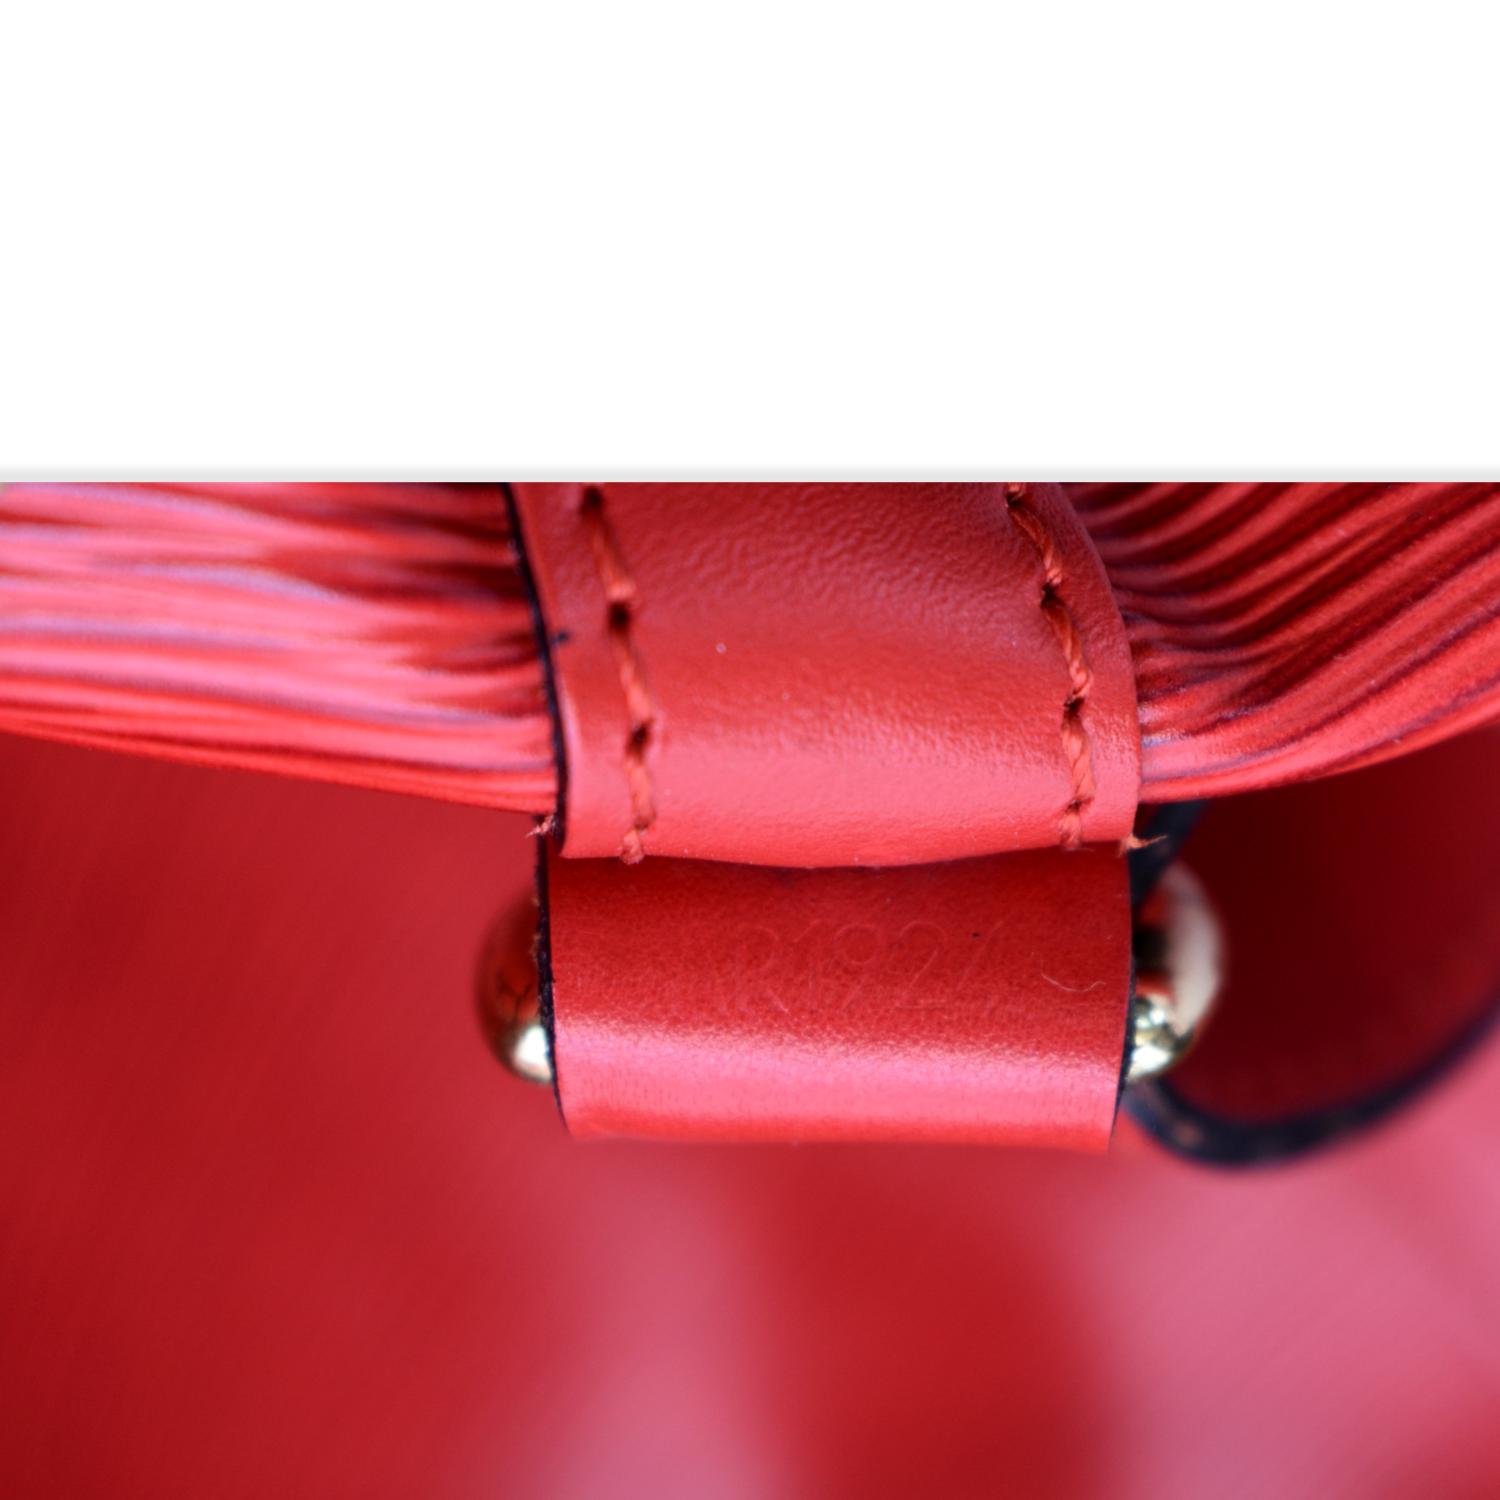 LOUIS VUITTON Shoulder Bag M44084 Noe bicolor Epi Leather Red Red Wome –